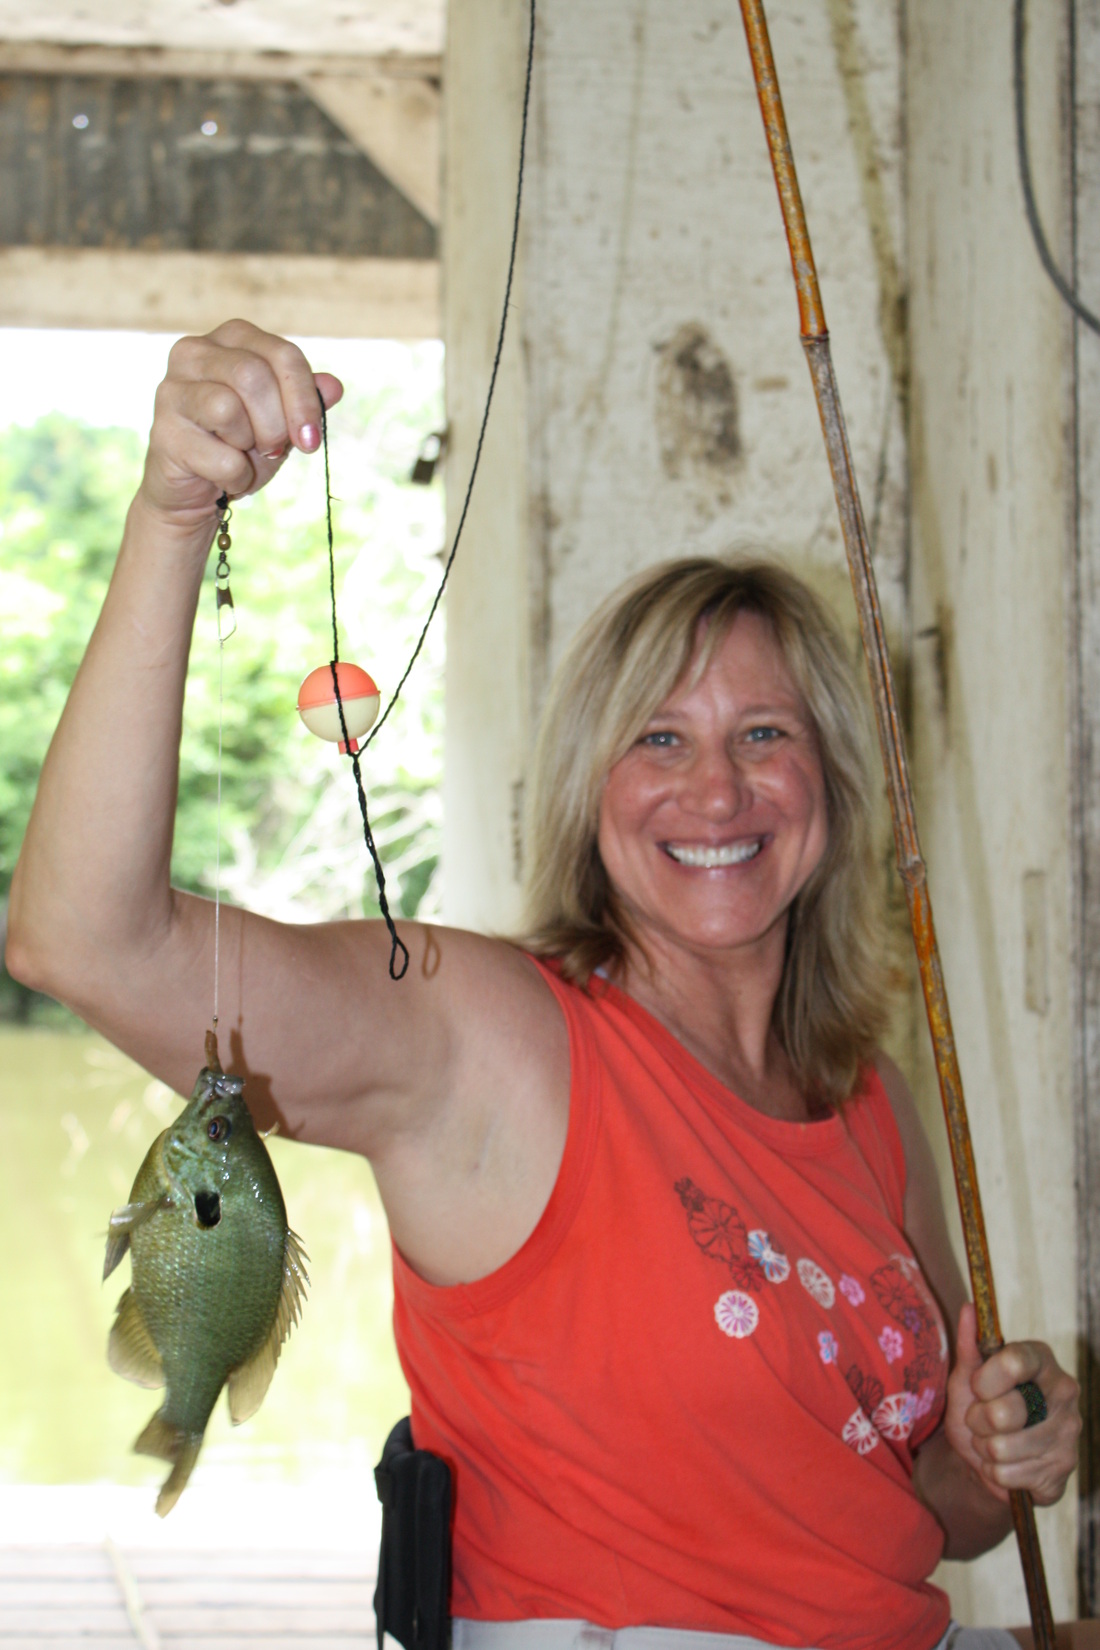 A blond woman holding a large bluegill